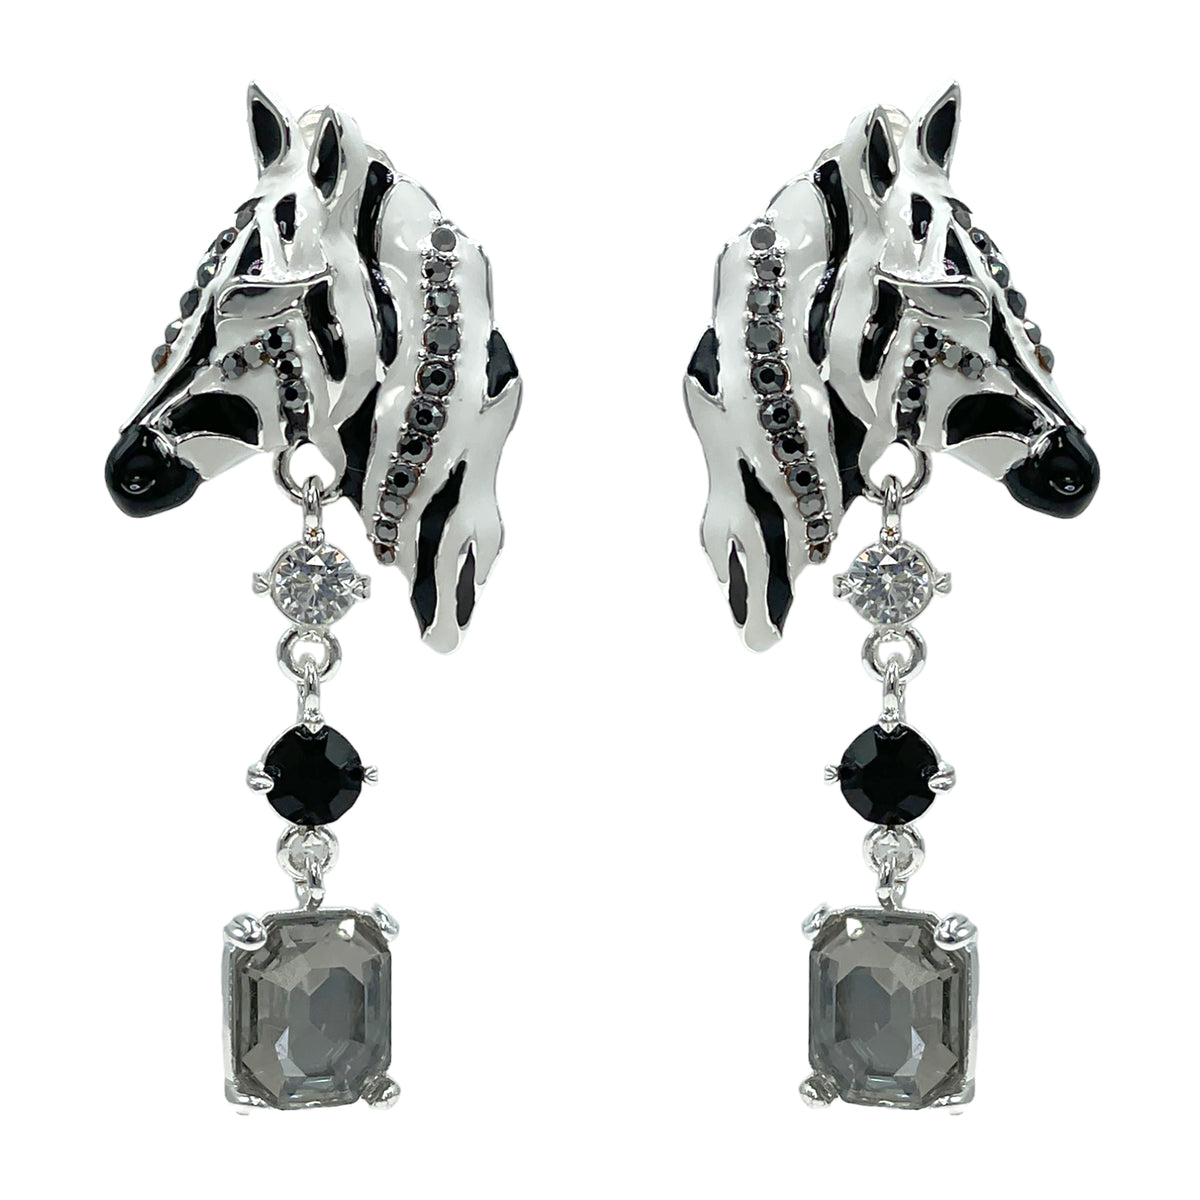 Ritzy Couture DeLuxe Wild Zebra Animal Print Statement Earrings - Fine Silver-Plated